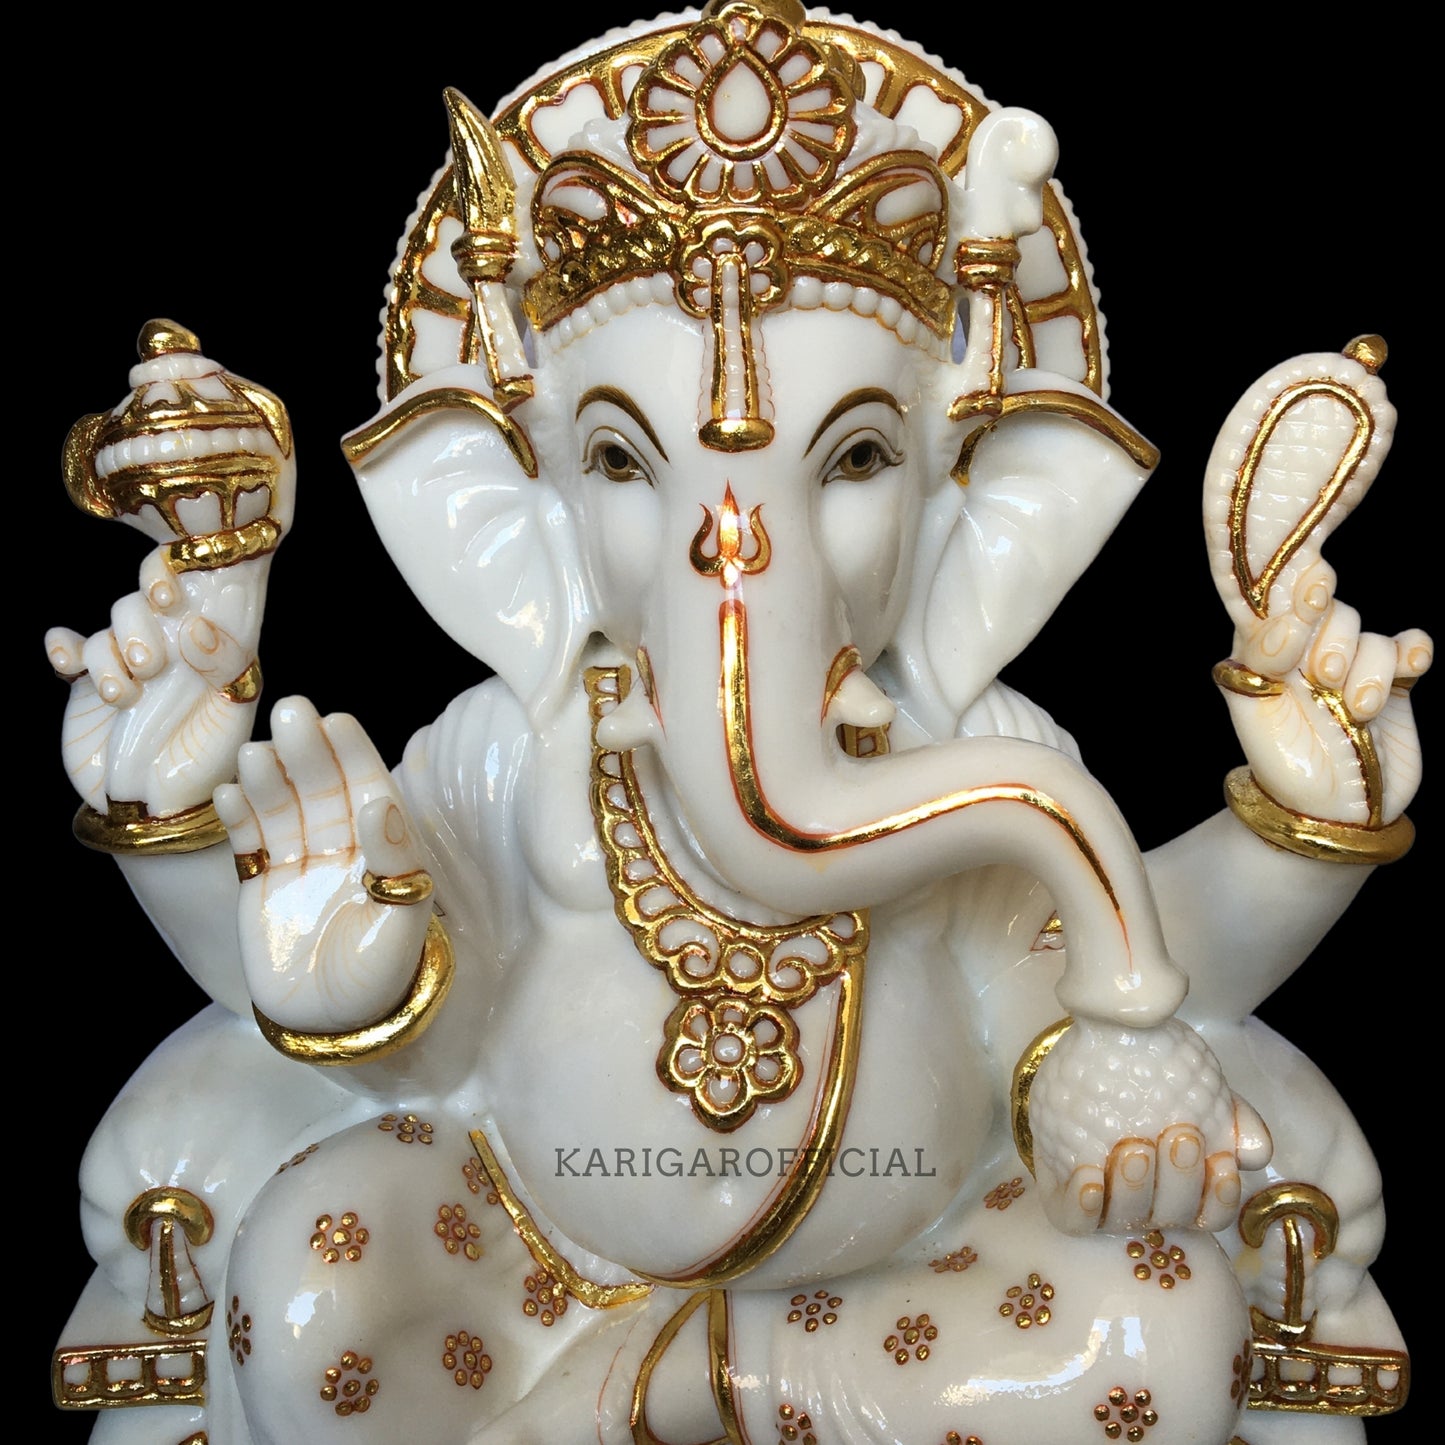 Golden Ganesha Statue Large 24 inches Marble Ganapati Idol For Home Temple Housewarming Gifts